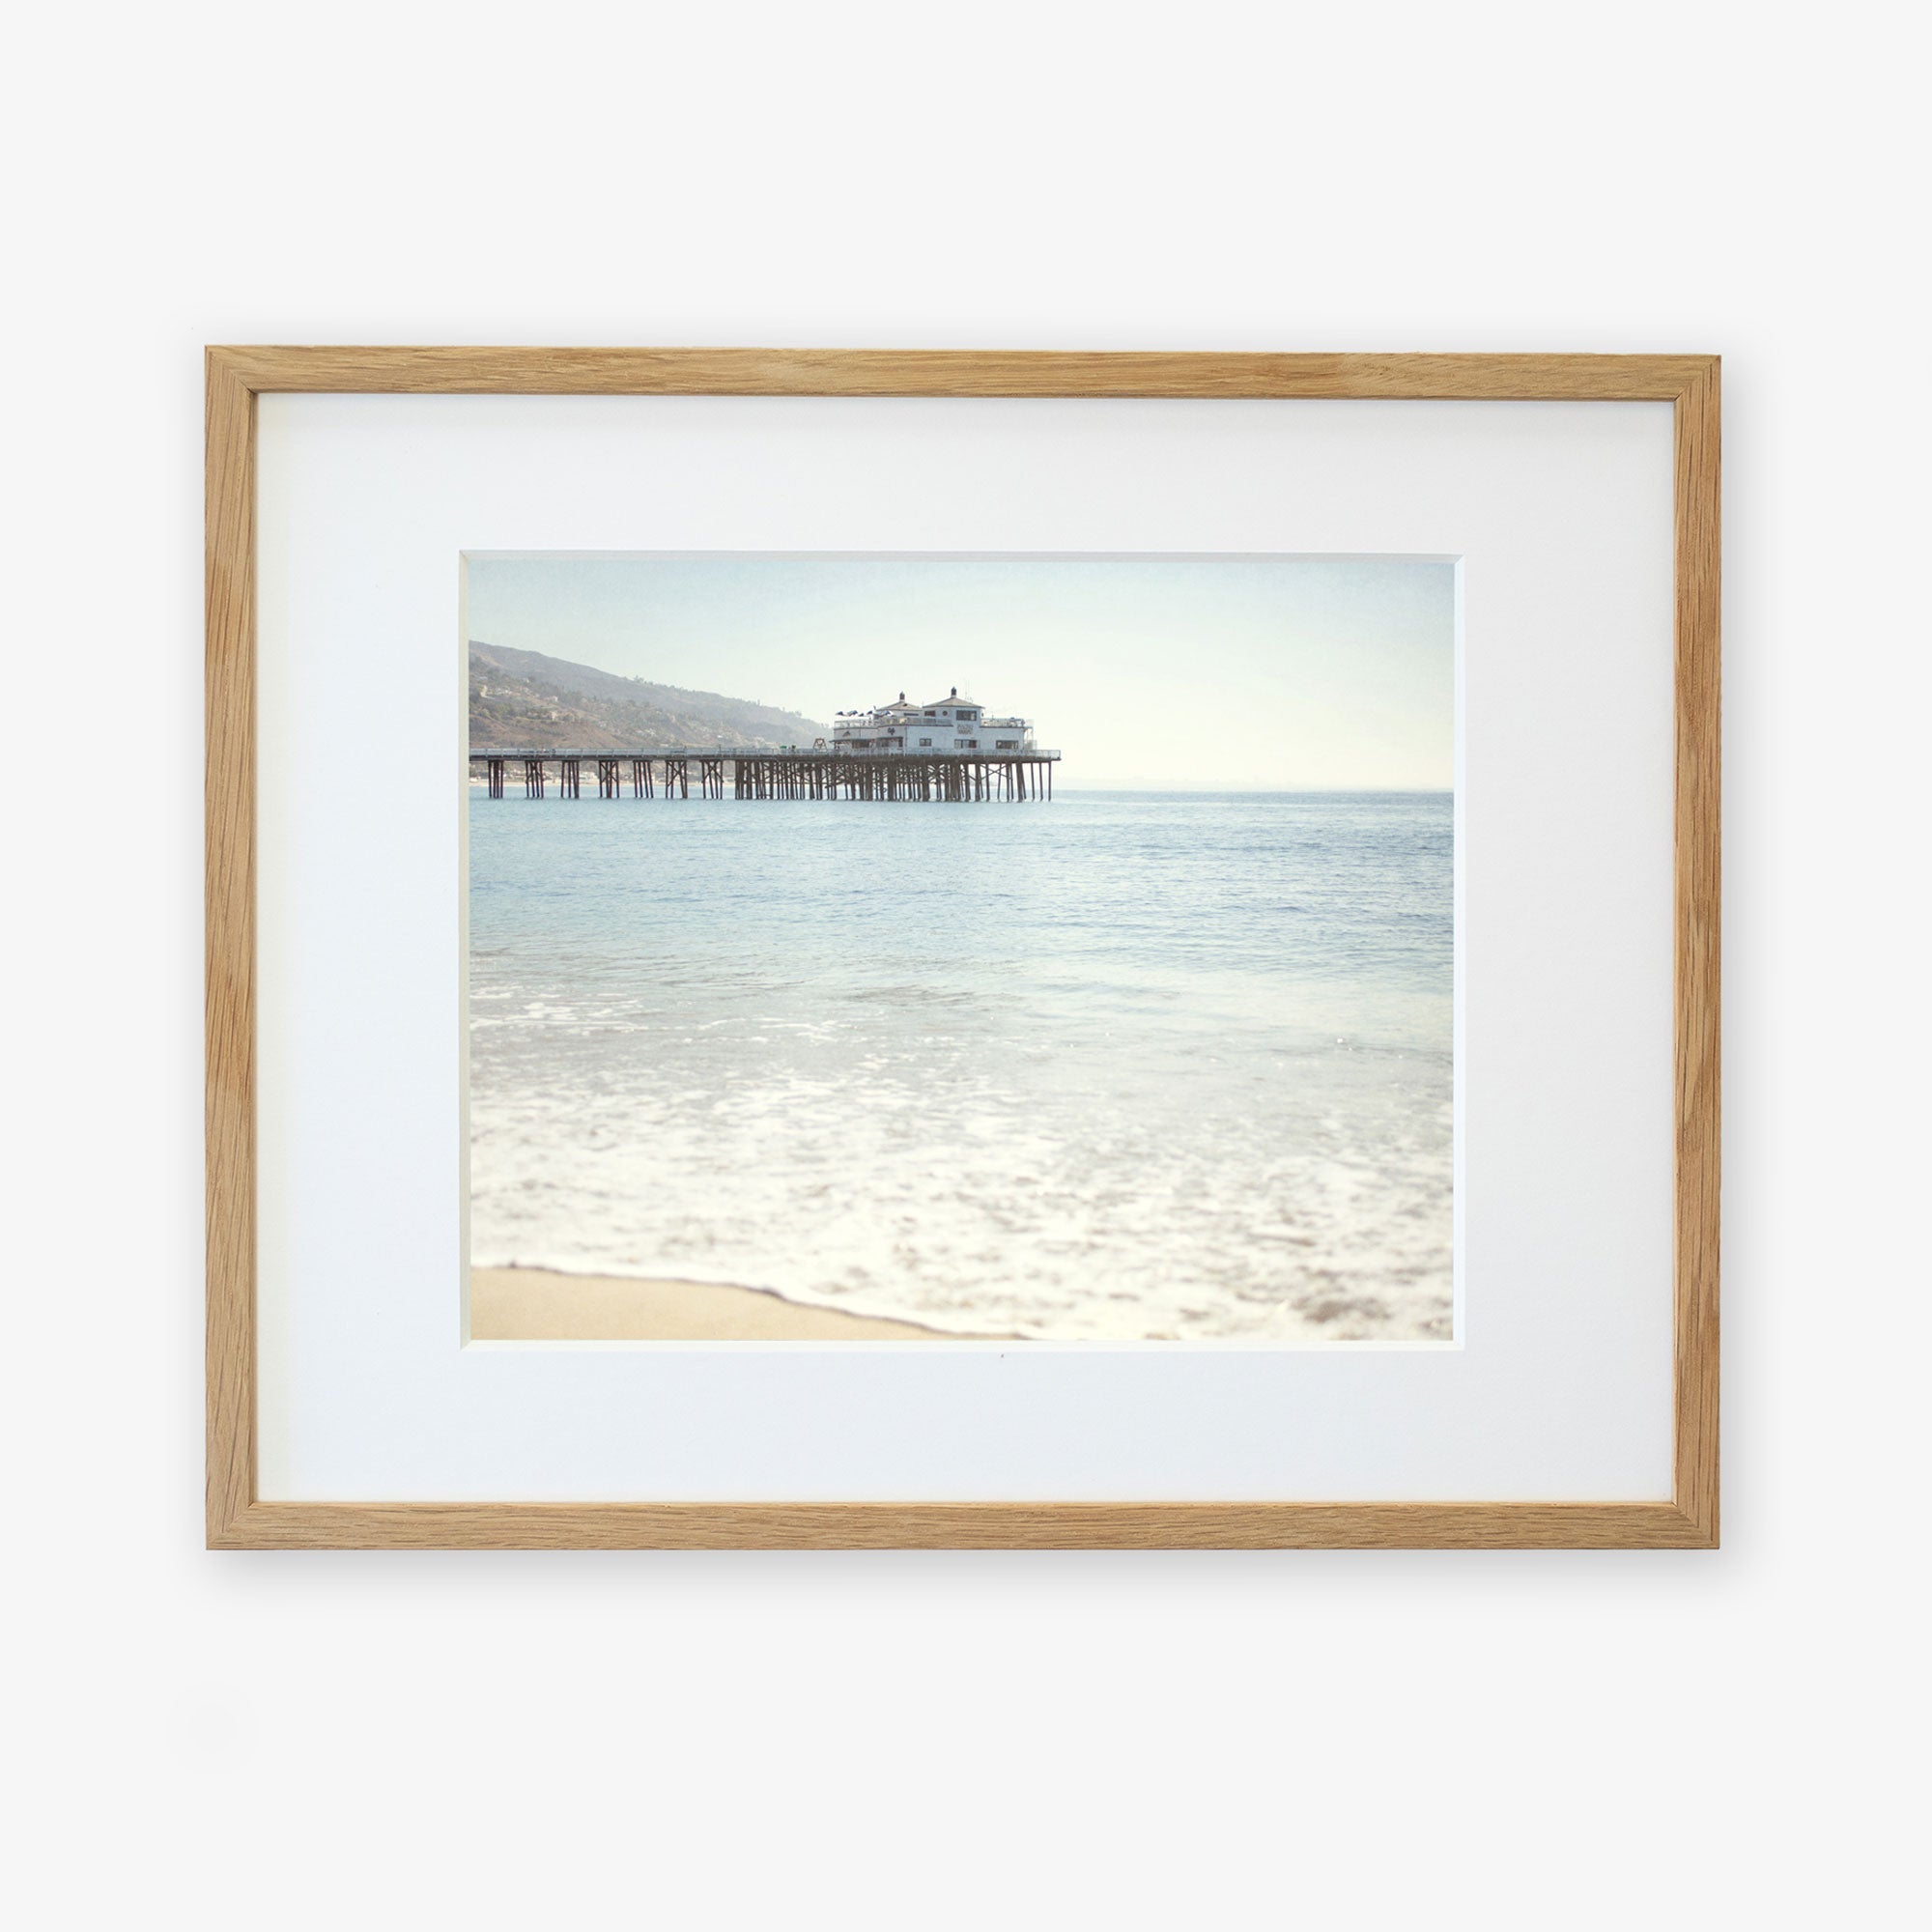 Framed photograph of a tranquil beach scene with gentle waves lapping the shore and California Beach Print, &#39;Malibu Pier&#39; extending into the calm blue sea, all under a clear sky by Offley Green.